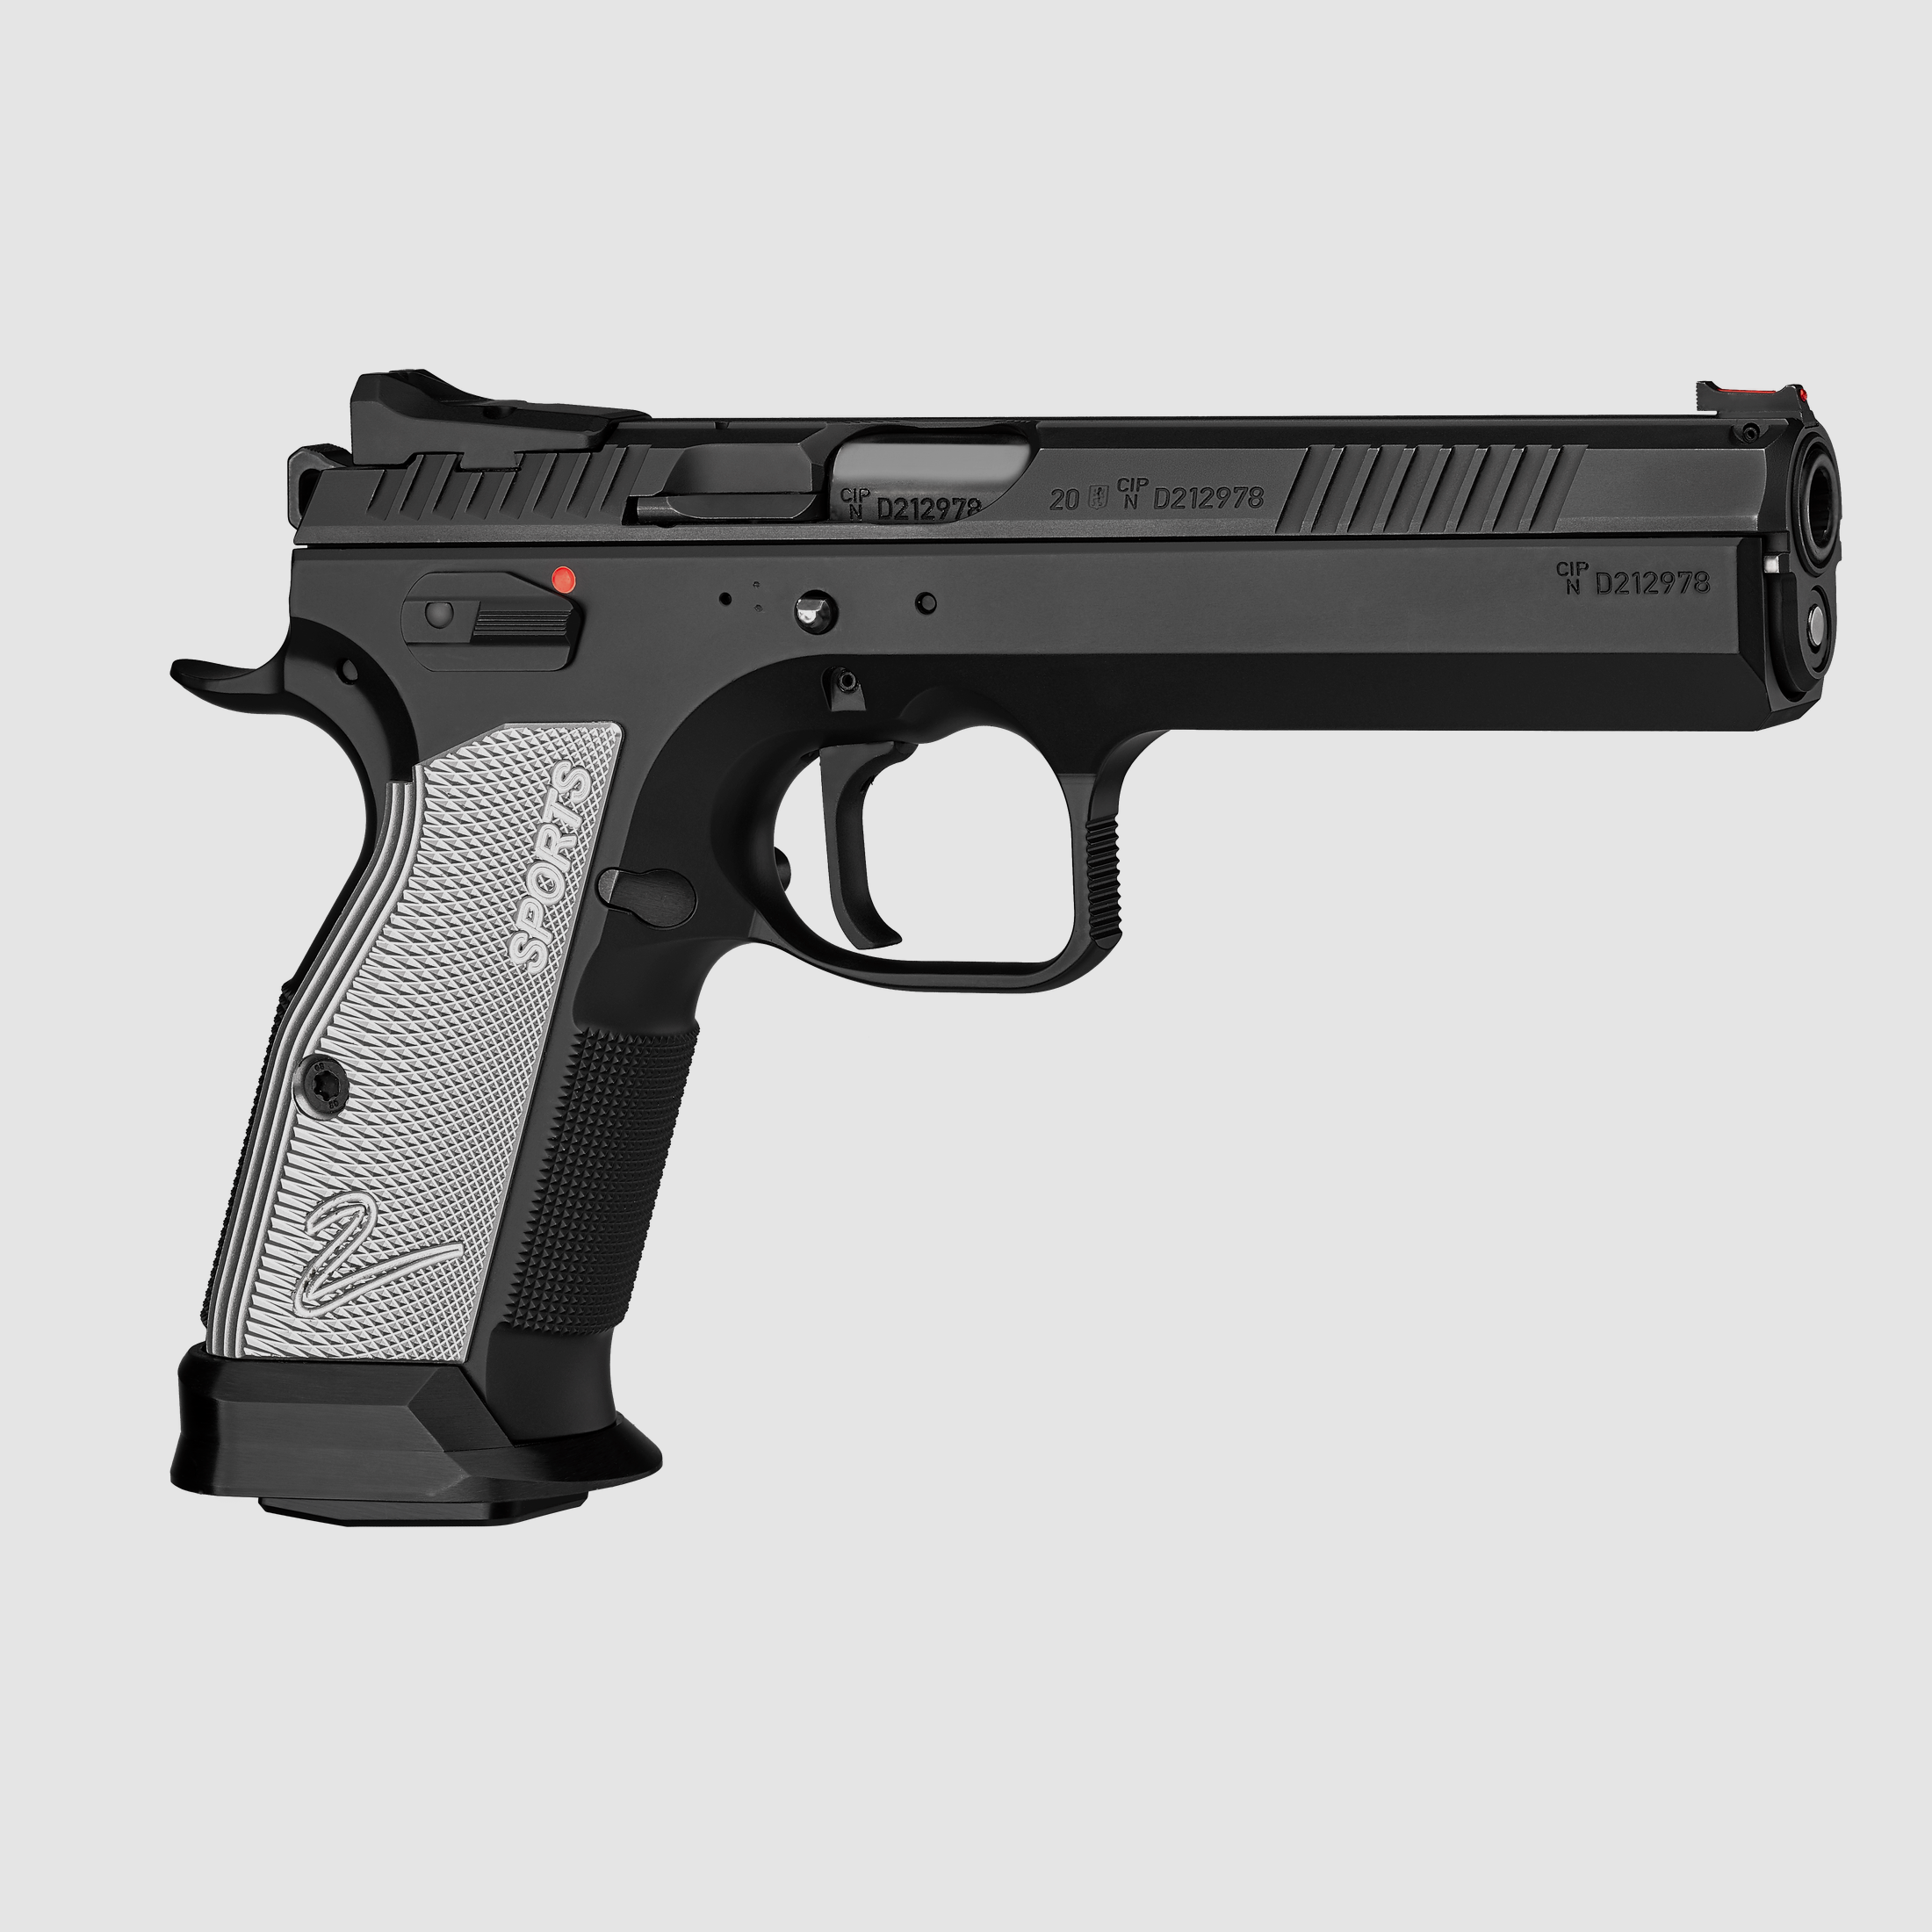 CZ 75 TS 2 silver 9mm Luger